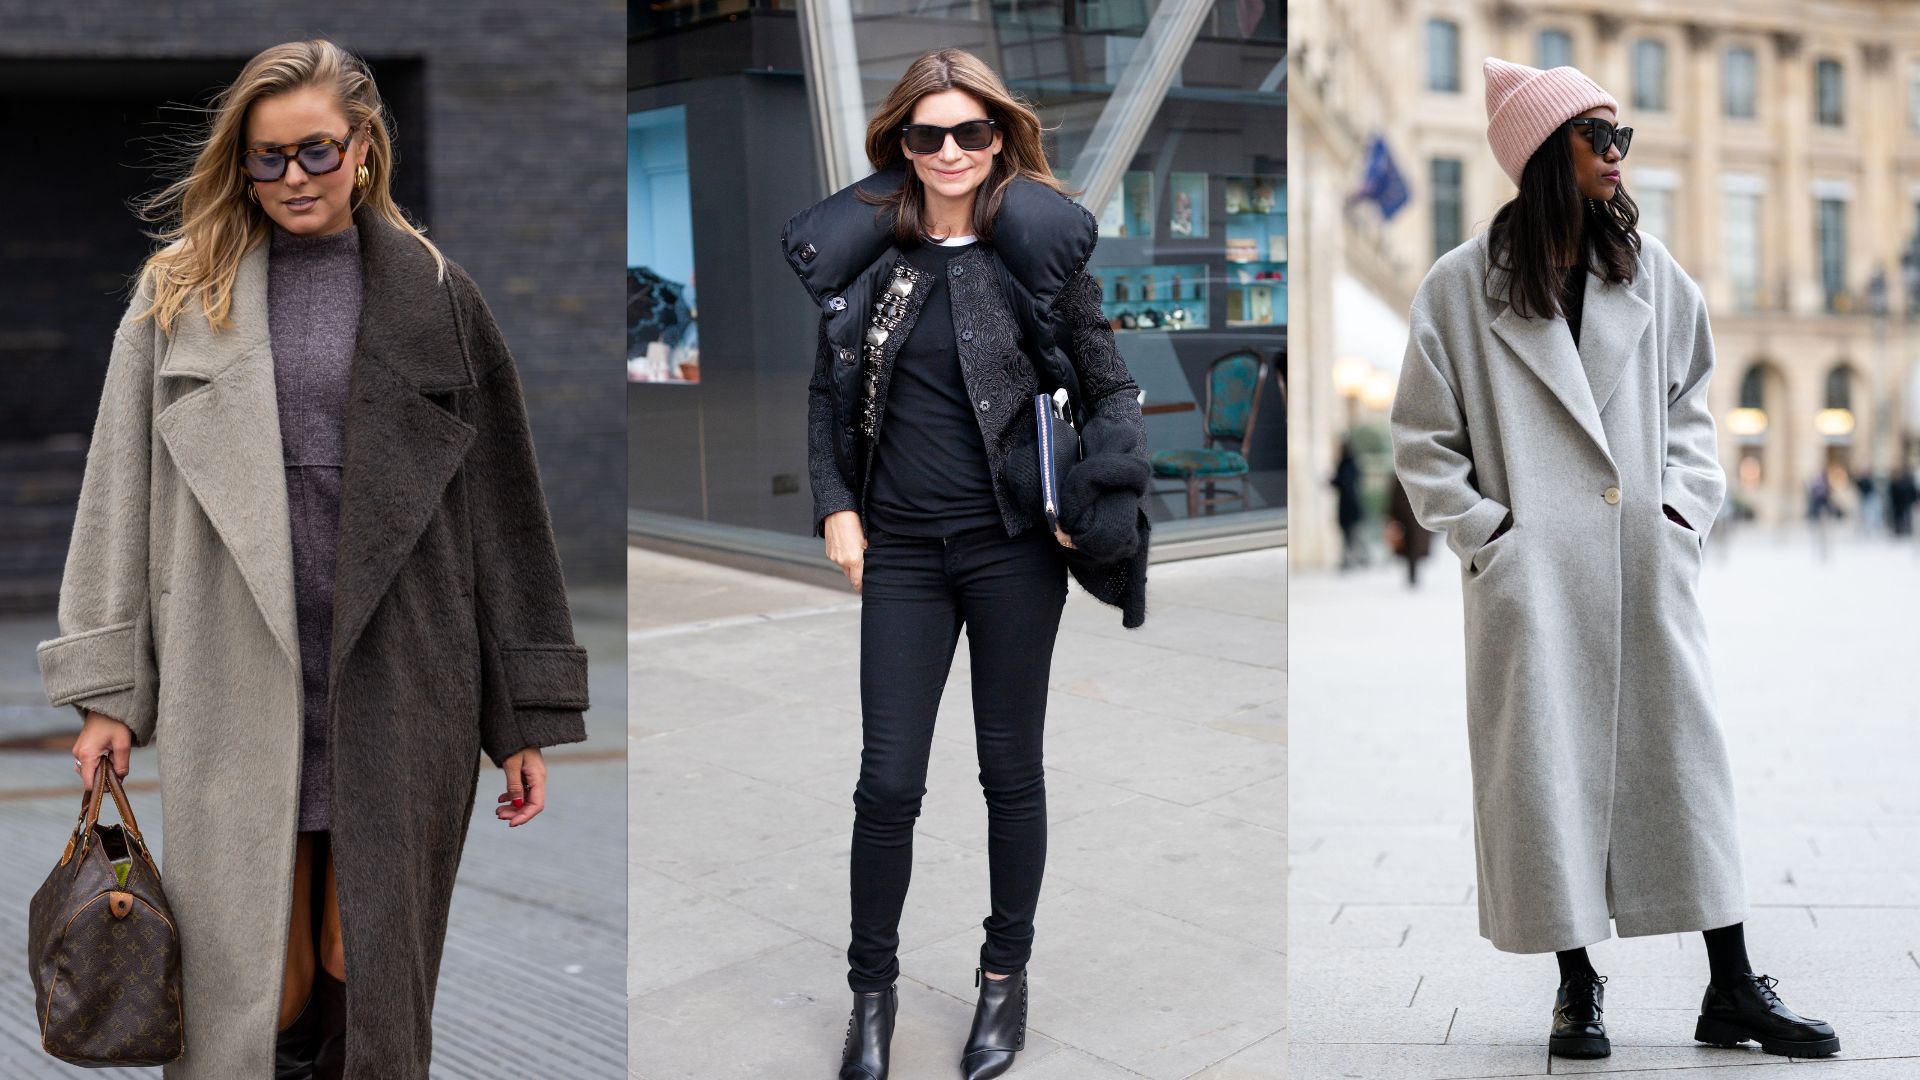 What to wear in the snow: How to stay warm, stylish and dry